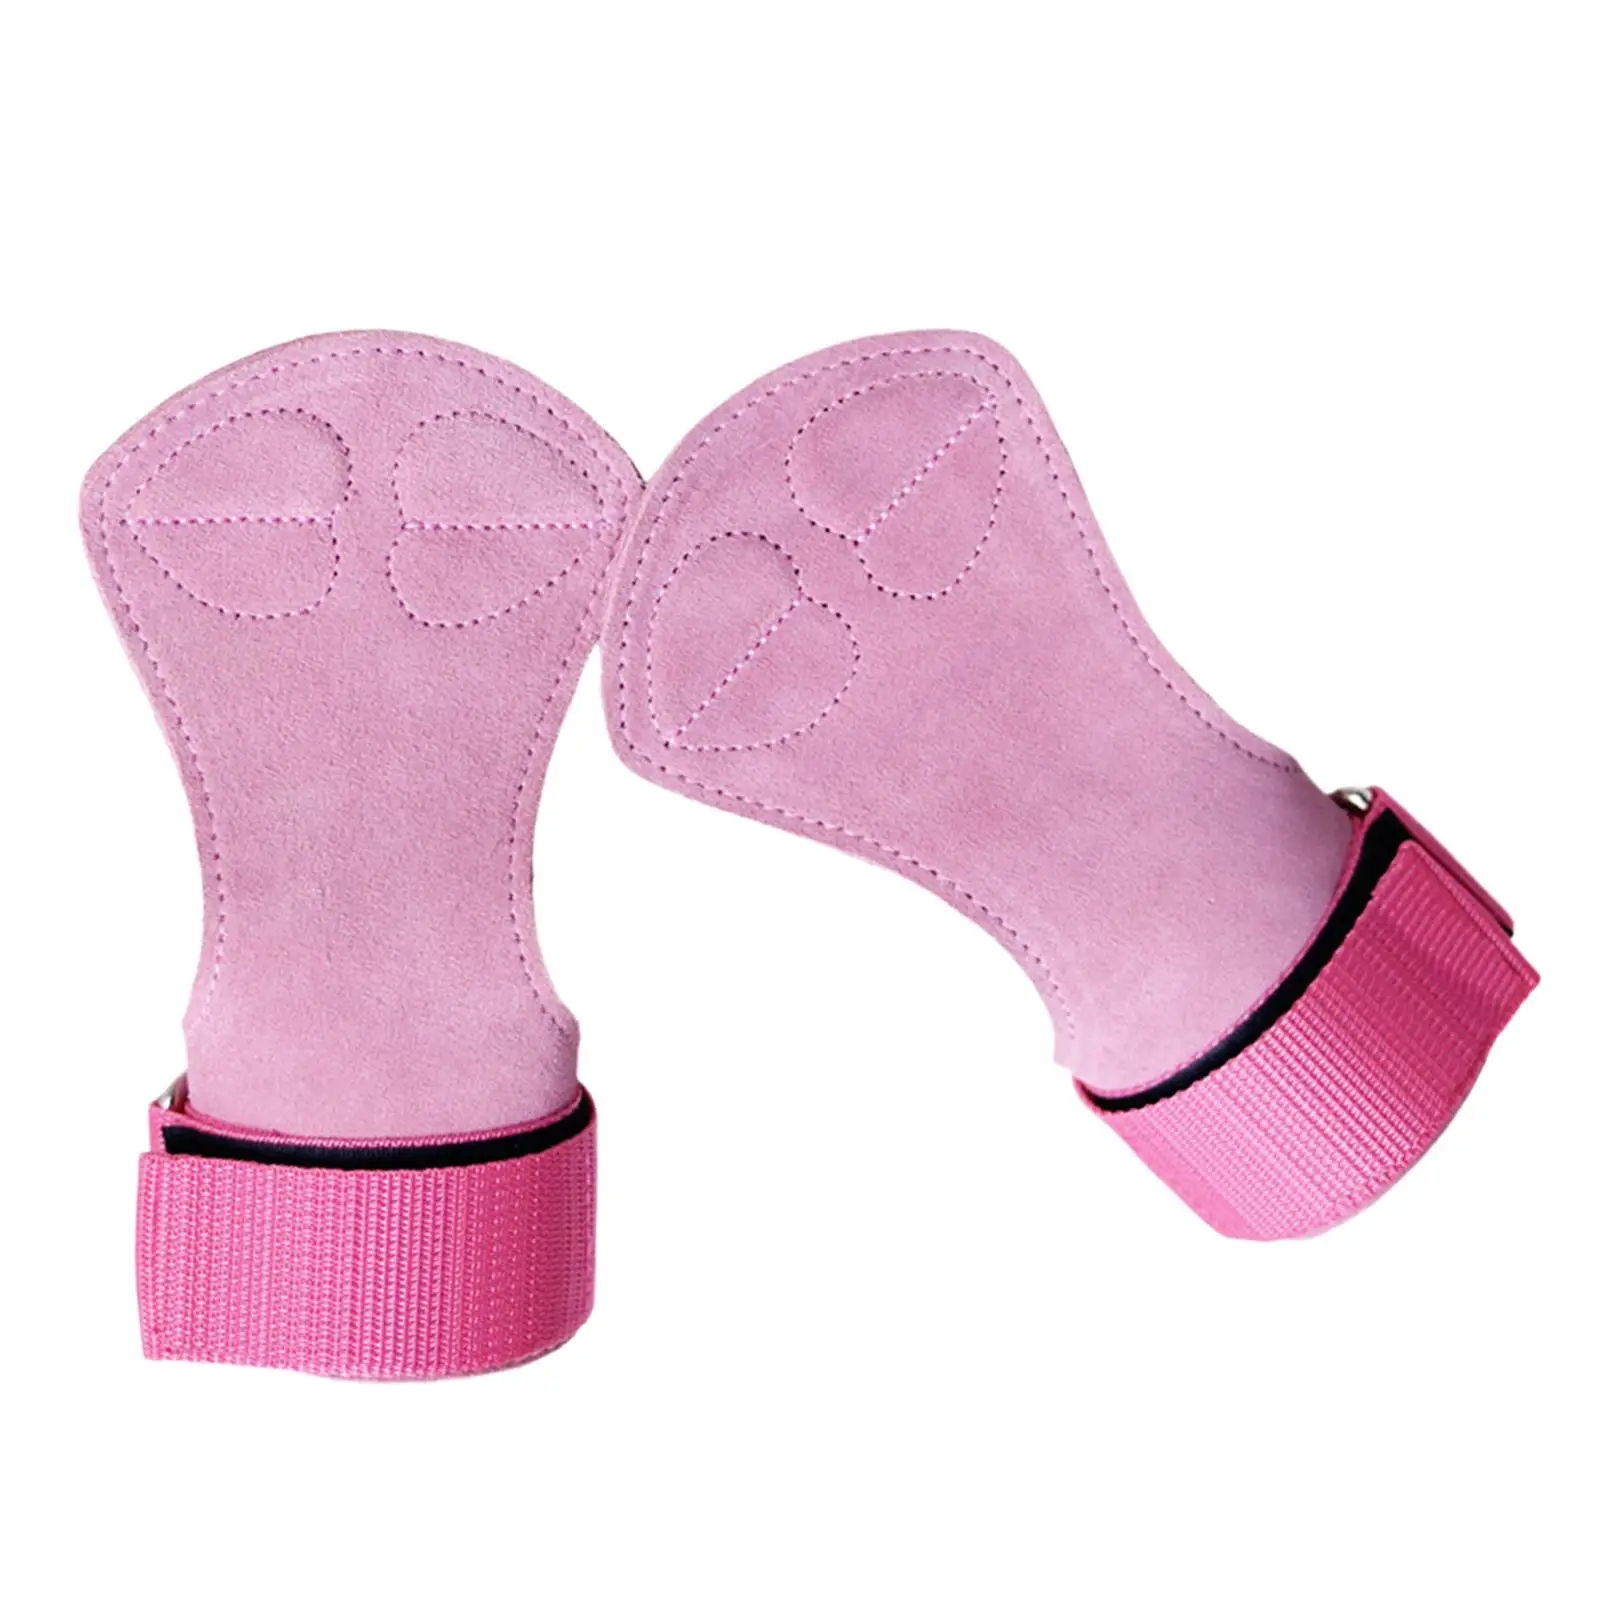 Anti Slip Weight Lifting Gloves Leather Palm Protection Durable Deadlifts Workout Gloves Lifting Pads for Workout Cycling Gym